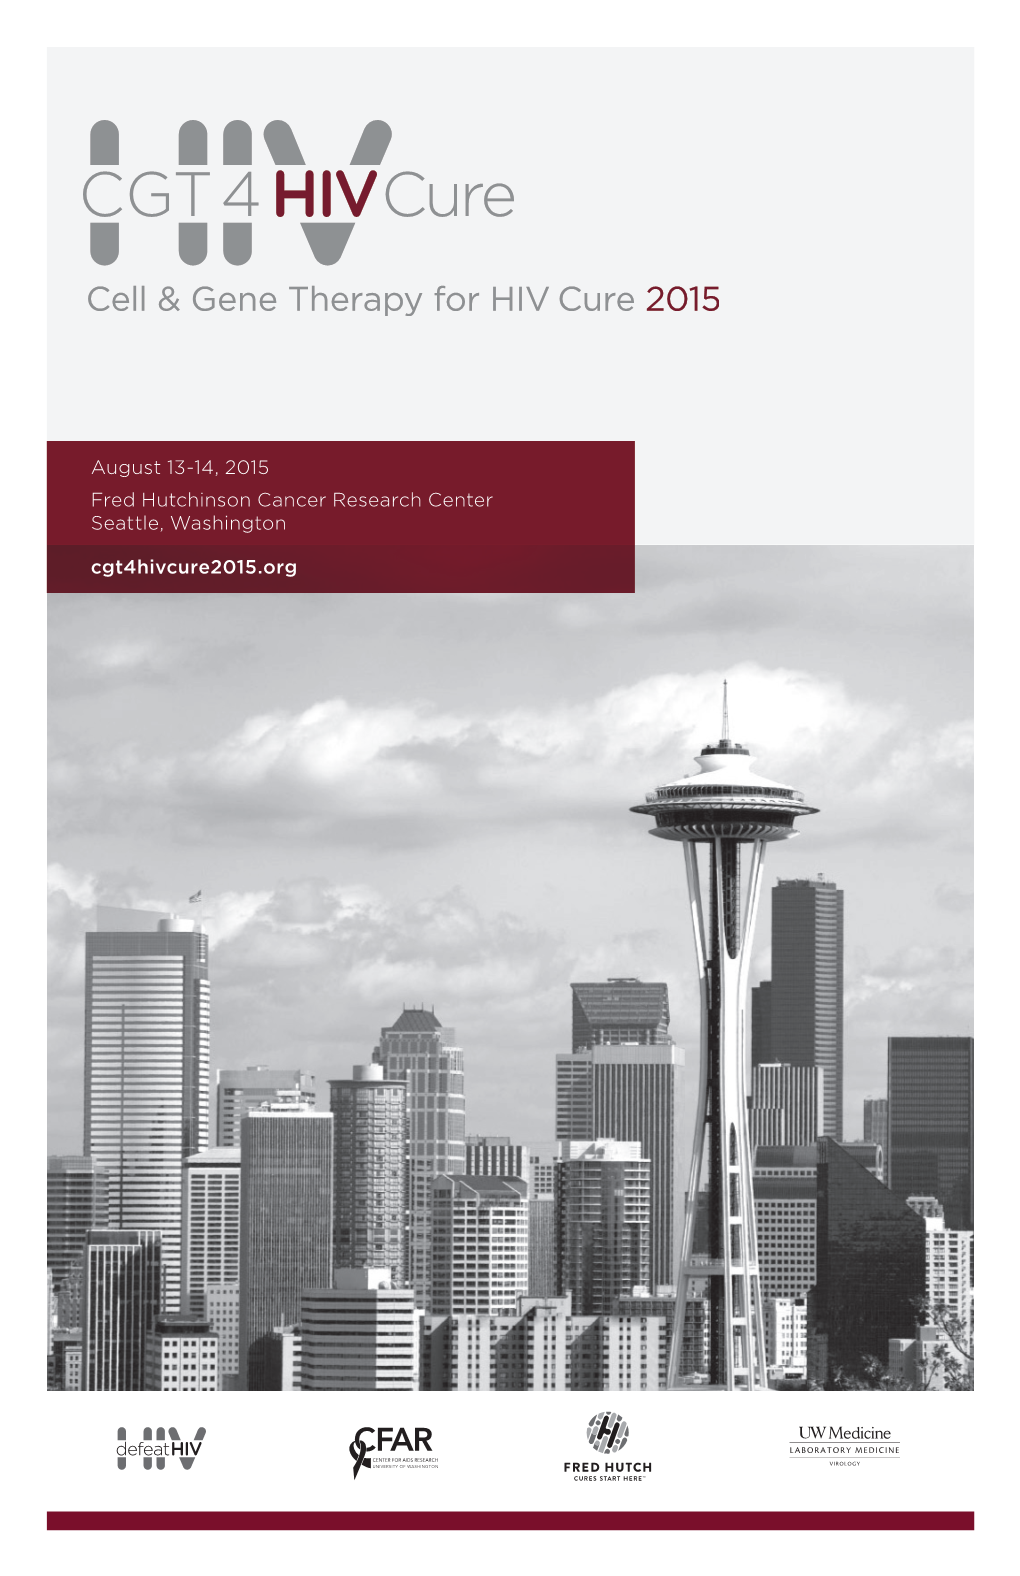 August 13-14, 2015 Fred Hutchinson Cancer Research Center Seattle, Washington Cgt4hivcure2015.Org COMMUNITY EVENT